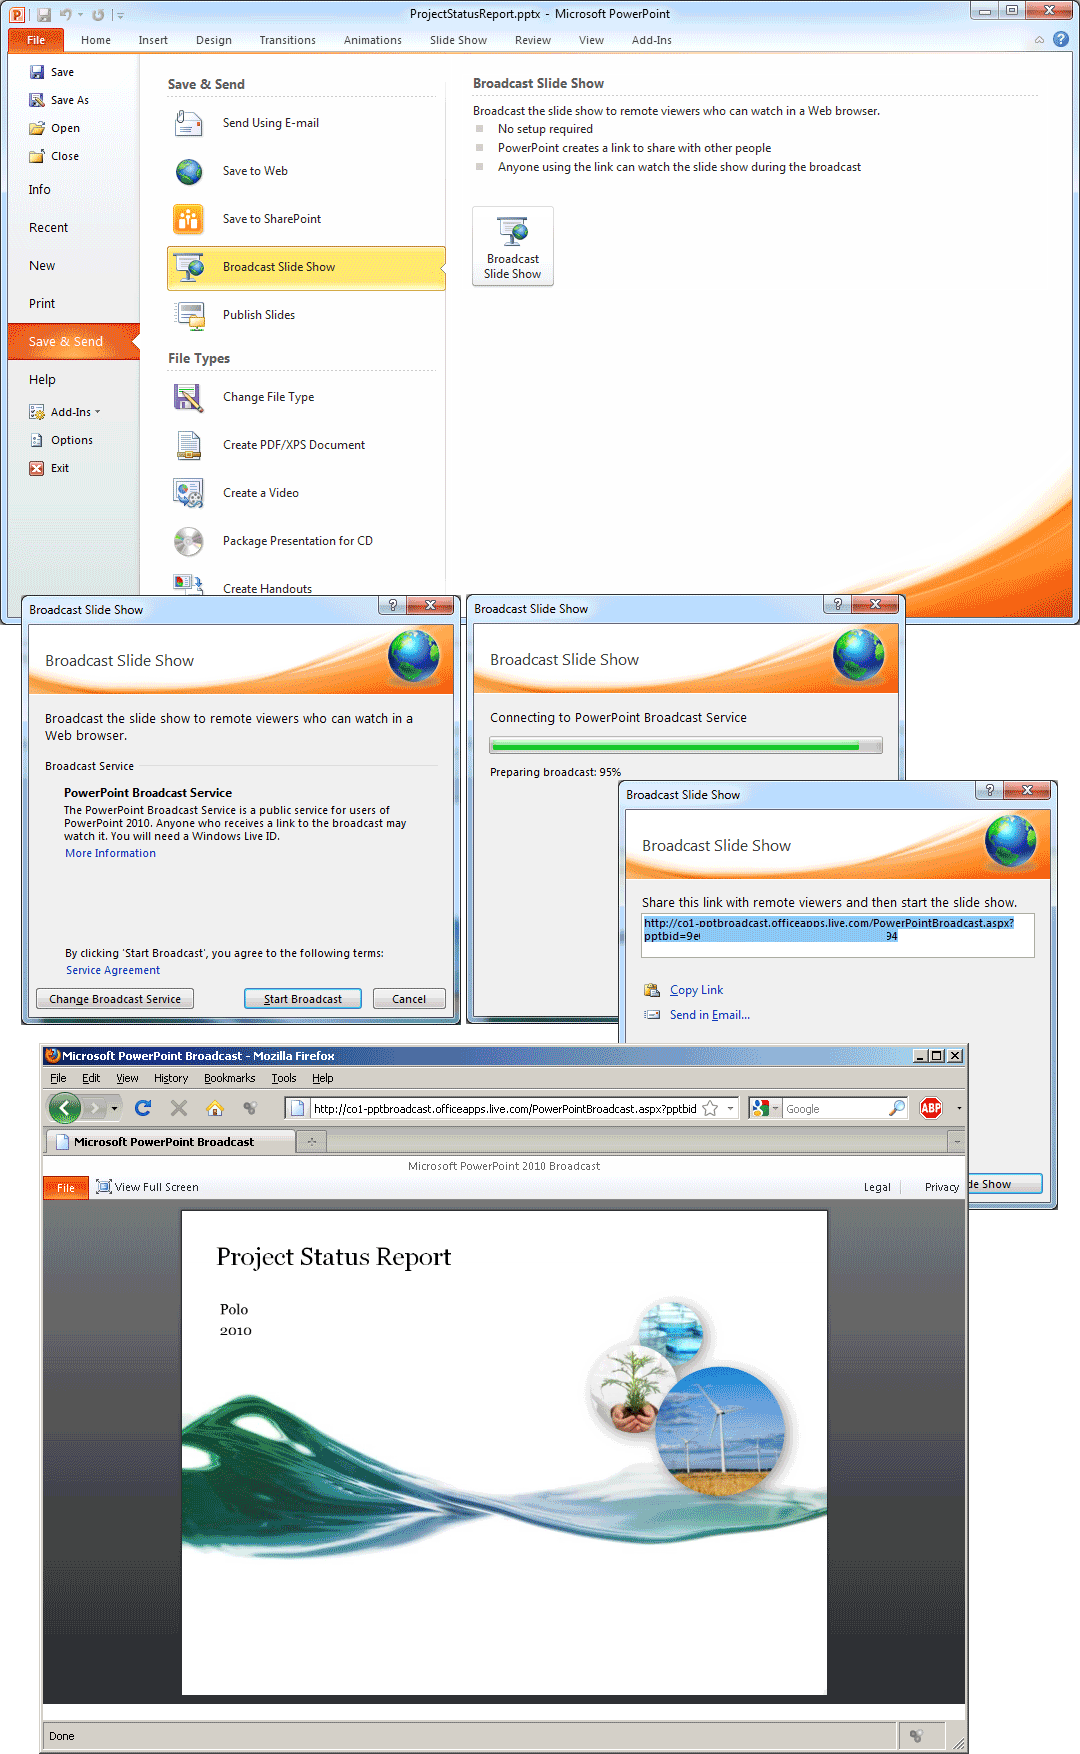 can i use ppxt file on open office 2010